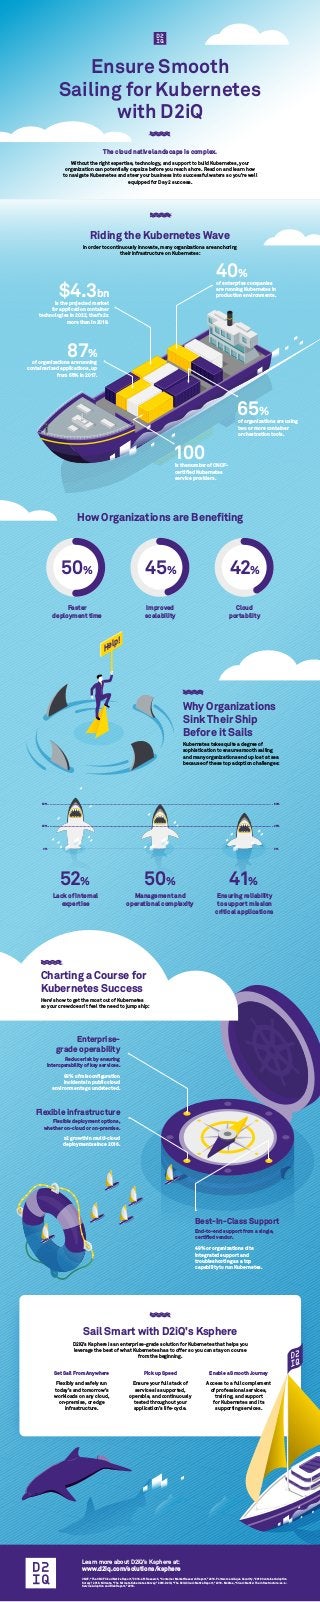 Help!
How Organizations are Benefiting
Ensure Smooth
Sailing for Kubernetes
with D2iQ
The cloud native landscape is complex.
Without the right expertise, technology, and support to build Kubernetes, your
organization can potentially capsize before you reach shore. Read on and learn how
to navigate Kubernetes and steer your business into successful waters so you’re well
equipped for Day 2 success.
Ensuring reliability
to support mission
critical applications
Management and
operational complexity
Lack of internal
expertise
Why Organizations
Sink Their Ship
Before it Sails
Kubernetes takes quite a degree of
sophistication to ensure smooth sailing
and many organizations end up lost at sea
because of these top adoption challenges:
Charting a Course for
Kubernetes Success
Here’s how to get the most out of Kubernetes
so your crew doesn’t feel the need to jump ship:
Enterprise-
grade operability
Reduce risk by ensuring
interoperability of key services.
Best-In-Class Support
End-to-end support from a single,
certified vendor.
Flexible infrastructure
Flexible deployment options,
whether on-cloud or on-premise.
Learn more about D2iQ’s Ksphere at:
www.d2iq.com/solutions/ksphere
CNCF, “The CNCF Cloud Native Report,” 2018. 451 Research, “Container Market Research Report,” 2019. Portworx and Aqua Security, “2019 Container Adoption
Survey,” 2019. Nirmata, “The Nirmata Kubernetes Survey,” 2019. D2iQ, “The D2iQ Cloud-Native Report,” 2018. McAfee, “Cloud-Native: The Infrastructure-as-a-
Service Adoption and Risk Report,” 2018.
Riding the Kubernetes Wave
In order to continuously innovate, many organizations are anchoring
their infrastructure on Kubernetes:
Faster
deployment time
Improved
scalability
Cloud
portability
is the number of CNCF-
certified Kubernetes
service providers.
100
50% 45%
52%
0% 0%
25% 25%
50% 50%
50% 41%
42%
of organizations are using
two or more container
orchestration tools.
of enterprise companies
are running Kubernetes in
production environments.$4.3bn
87%
40%
of organizations are running
containerized applications, up
from 55% in 2017.
is the projected market
for application container
technologies in 2022, that’s 2x
more than in 2019.
65%
Sail Smart with D2iQ’s Ksphere
D2iQ’s Ksphere is an enterprise-grade solution for Kubernetes that helps you
leverage the best of what Kubernetes has to offer so you can stay on course
from the beginning.
Set Sail From Anywhere
Flexibly and safely run
today’s and tomorrow’s
workloads on any cloud,
on-premise, or edge
infrastructure.
Pick up Speed
Ensure your full stack of
services is supported,
operable, and continuously
tested throughout your
application’s life-cycle.
Enable a Smooth Journey
Access to a full complement
of professional services,
training, and support
for Kubernetes and its
supporting services.
x2 growth in multi-cloud
deployments since 2016.
99% of misconfiguration
incidents in public cloud
environments go undetected.
49% or organizations cite
integrated support and
troubleshooting as a top
capability to run Kubernetes.
 